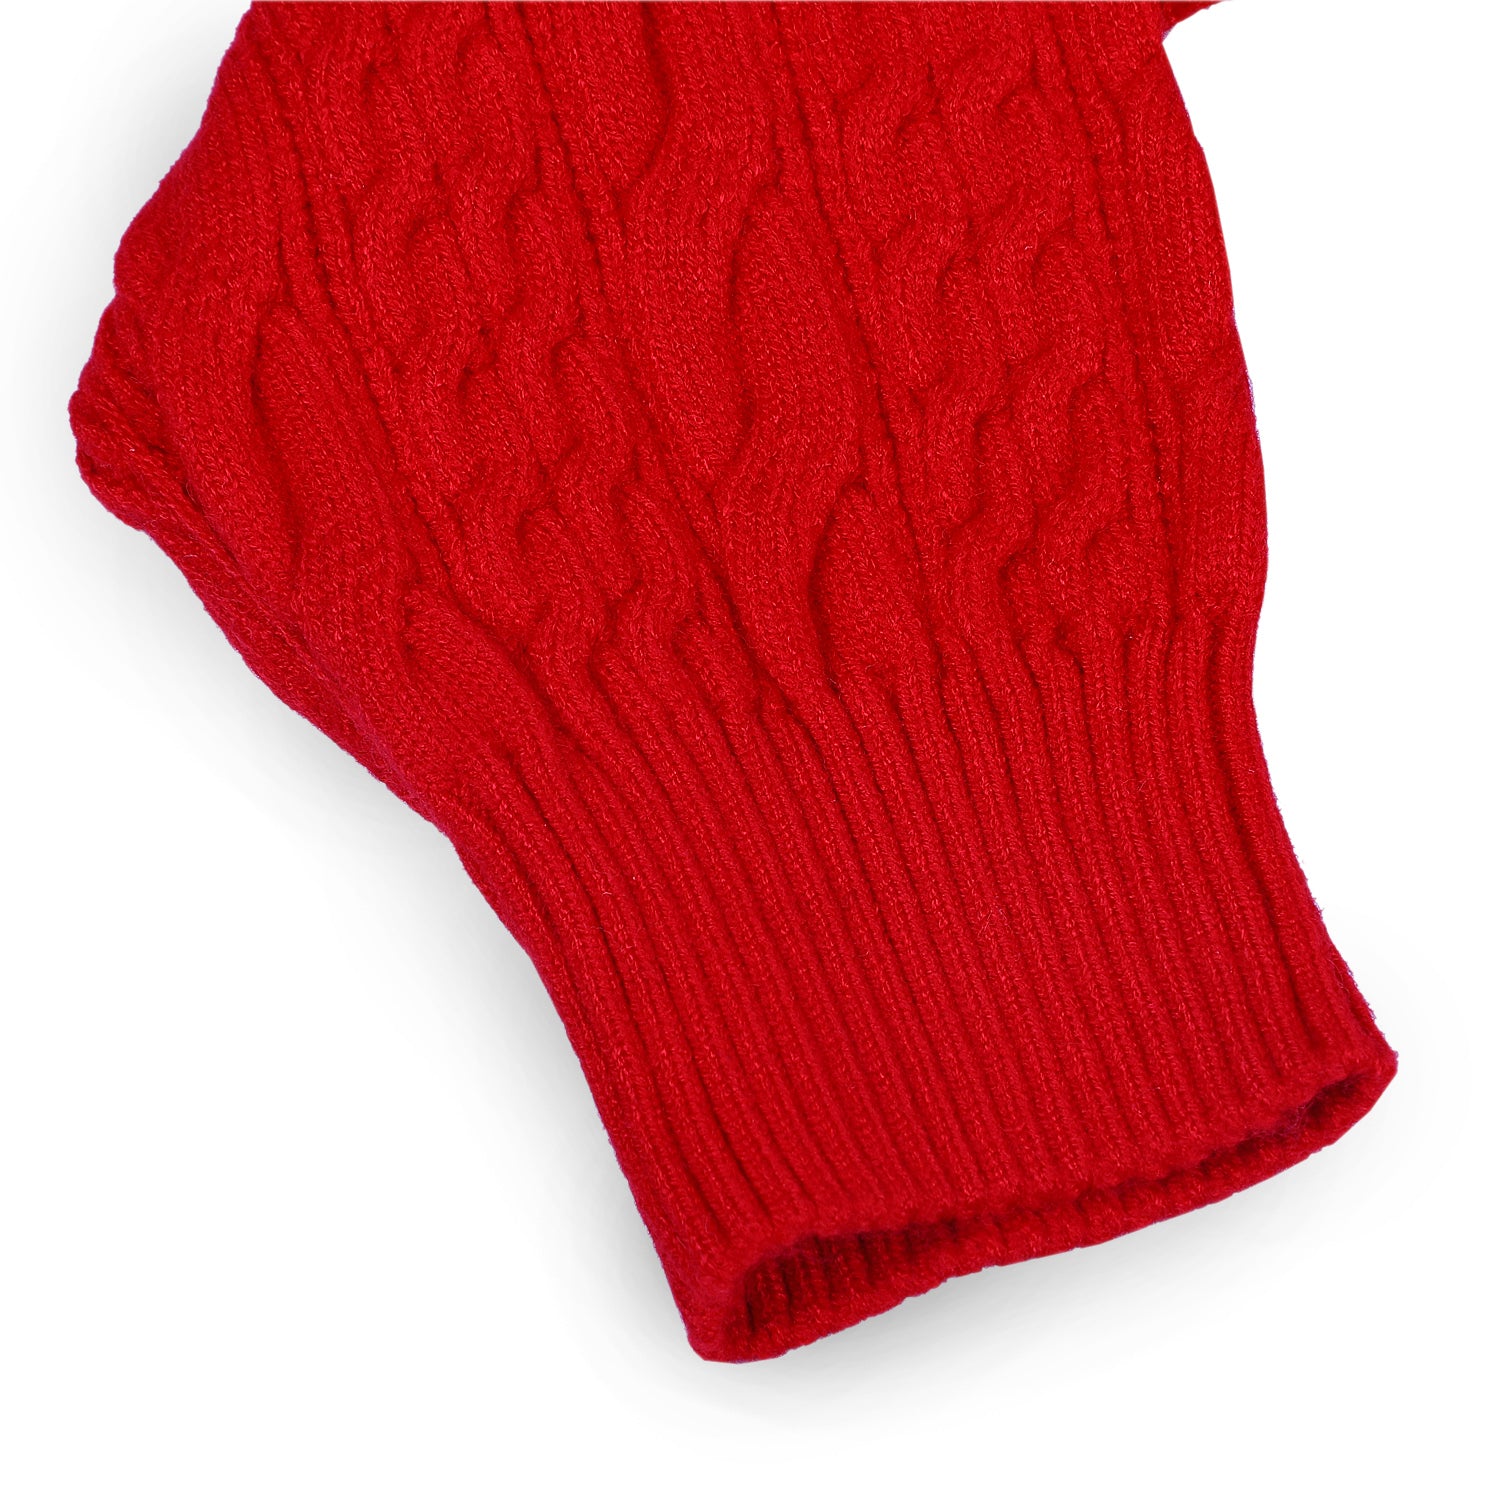 Ruffled Jumper Solid Premium Full Sleeves Braided Knit Sweater - Red - Baby Moo